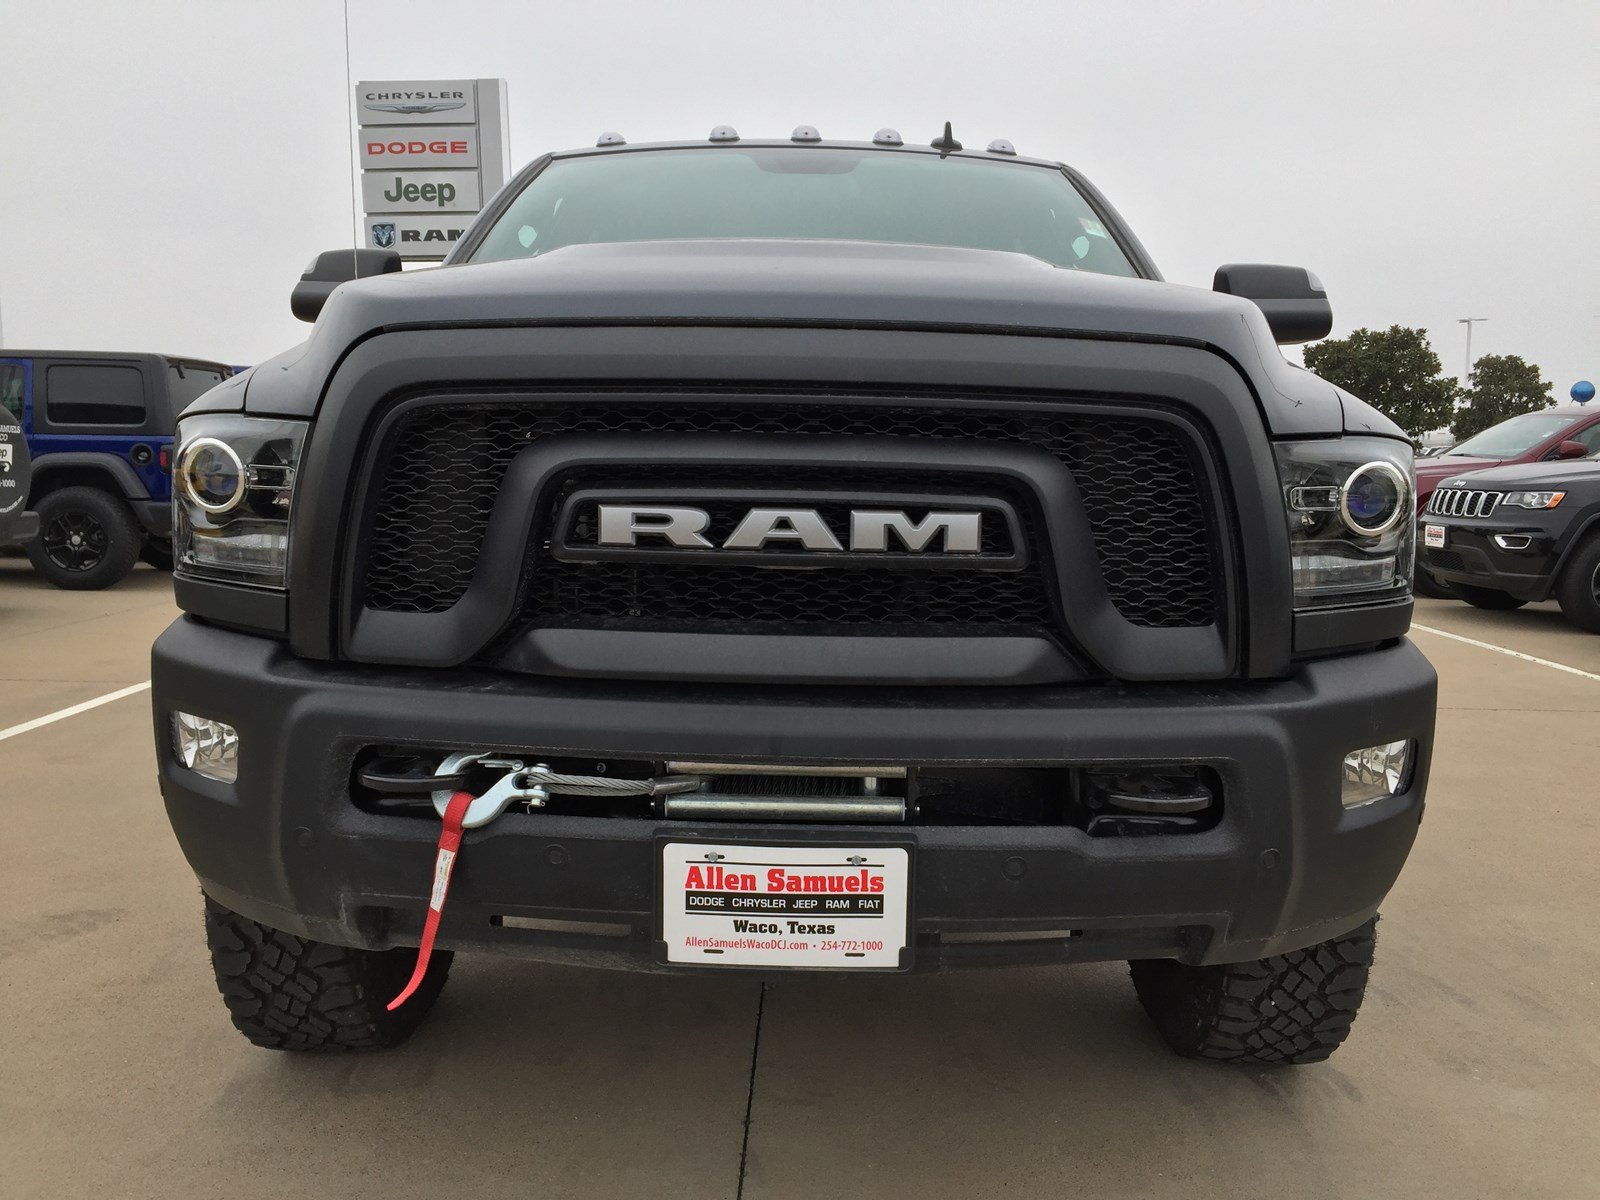 New 2018 Ram 2500 Power Wagon - Ford F-series , HD Wallpaper & Backgrounds